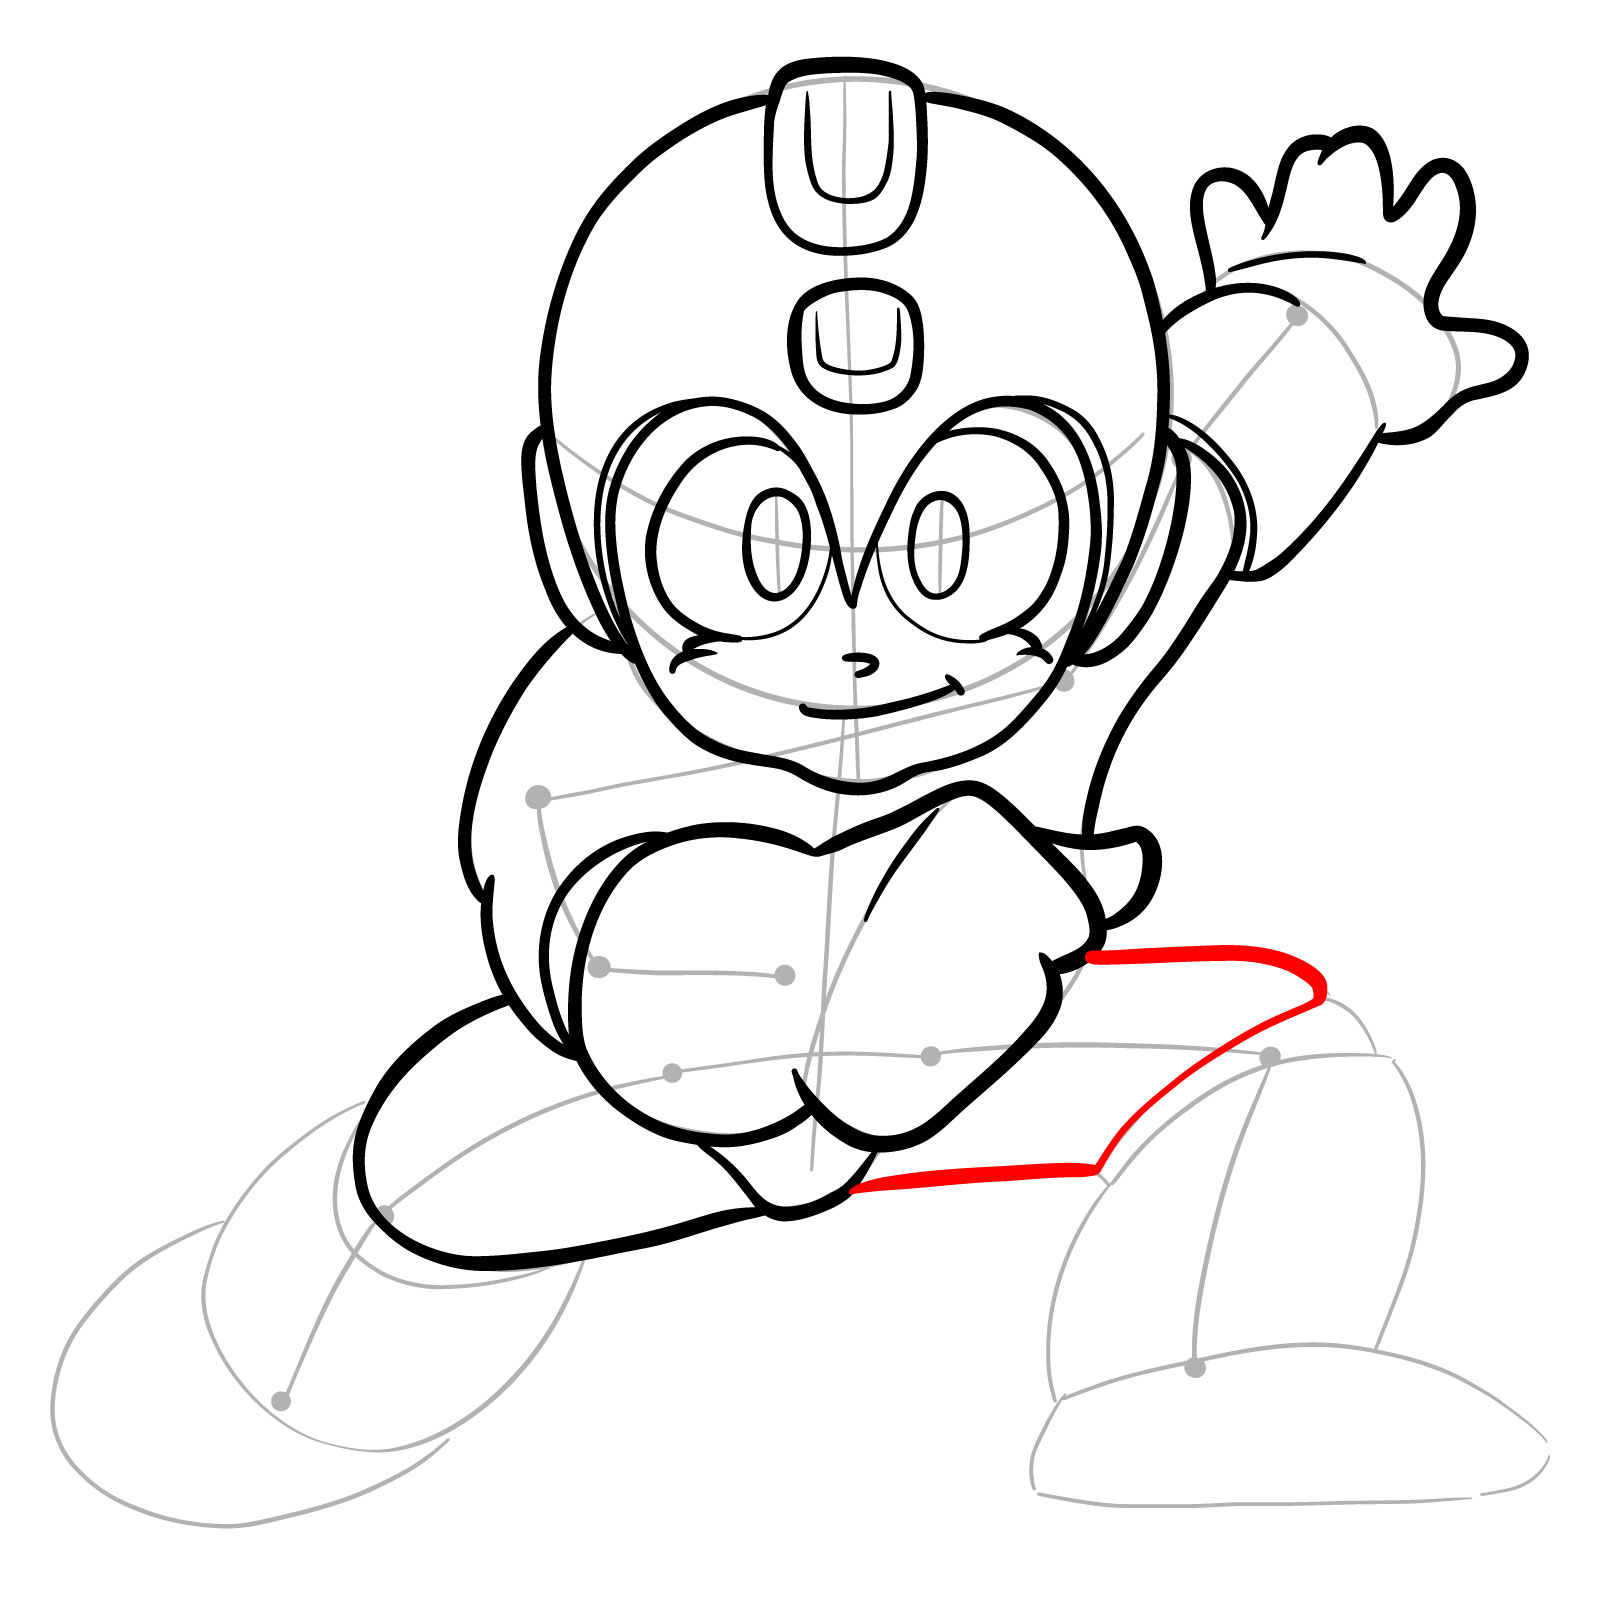 How to draw Mega Man from the original game - step 20